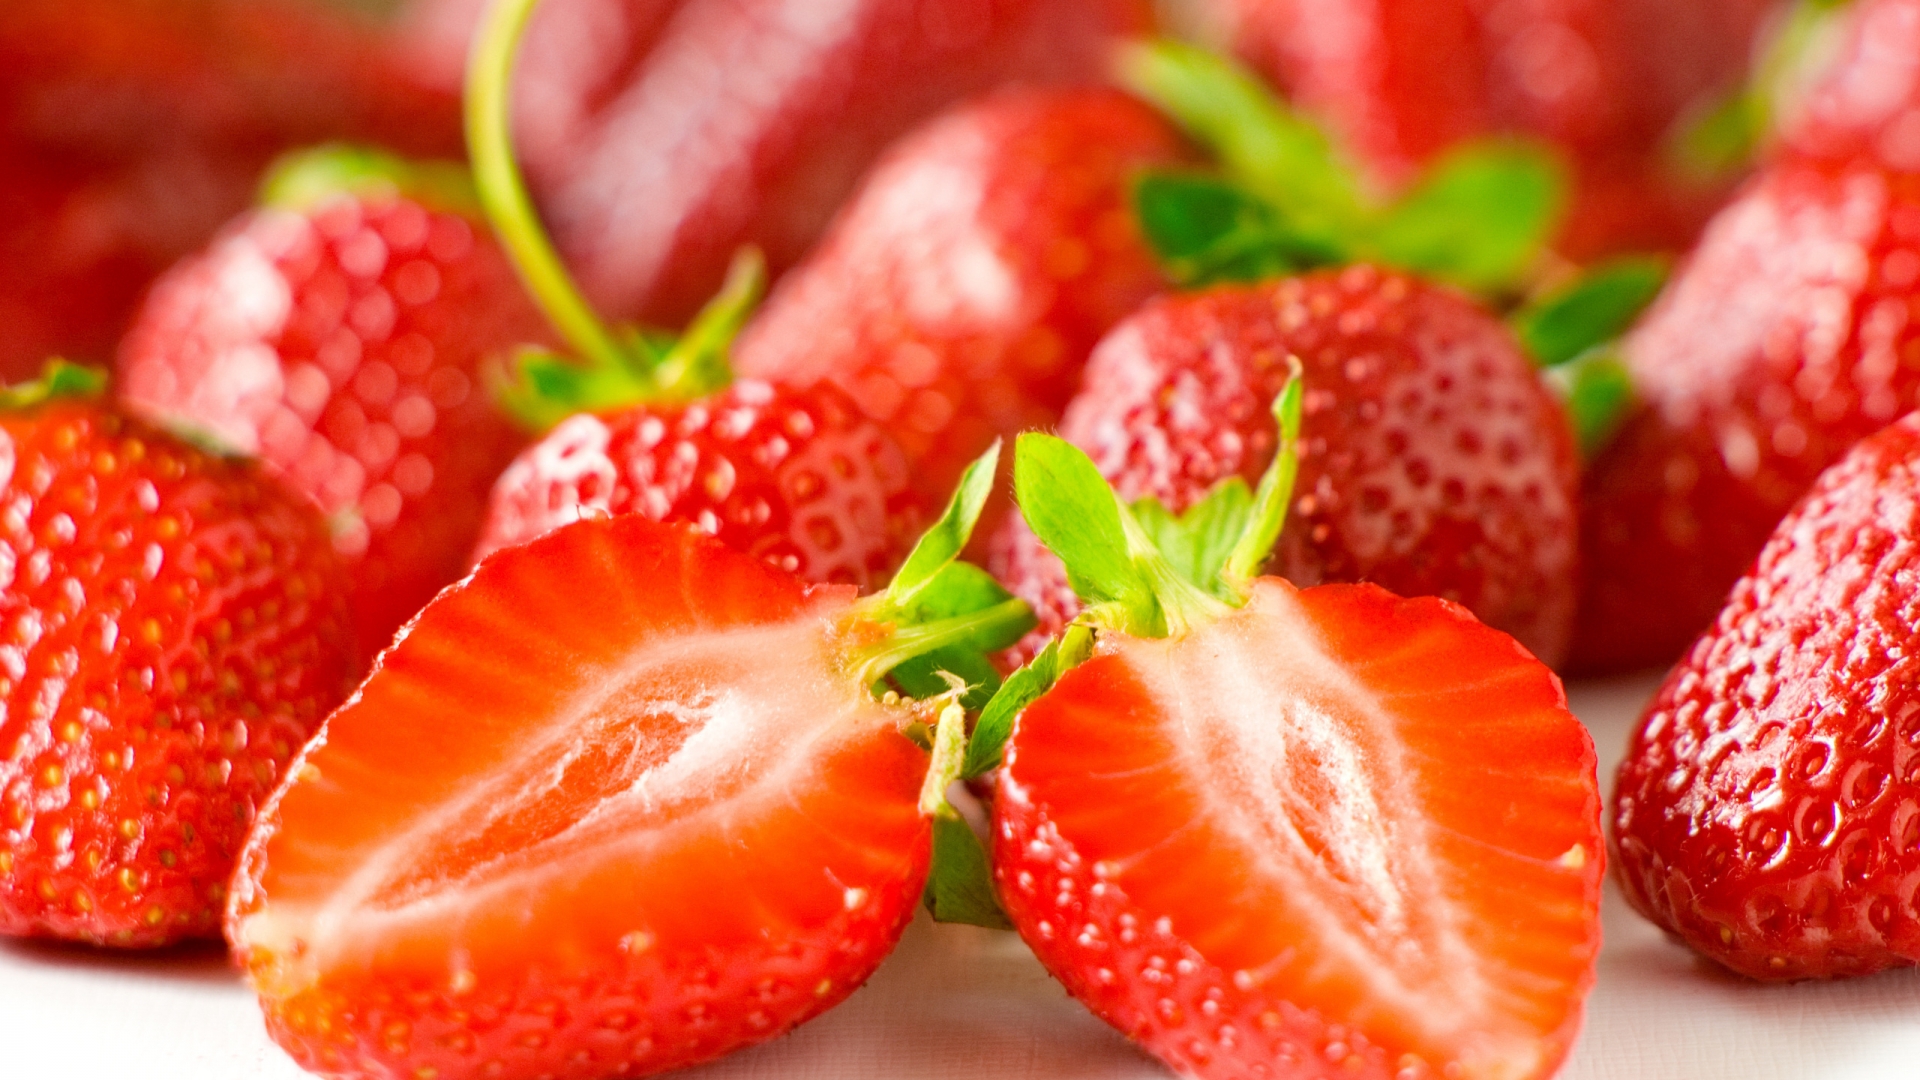 Strawberry Fruits for 1920 x 1080 HDTV 1080p resolution